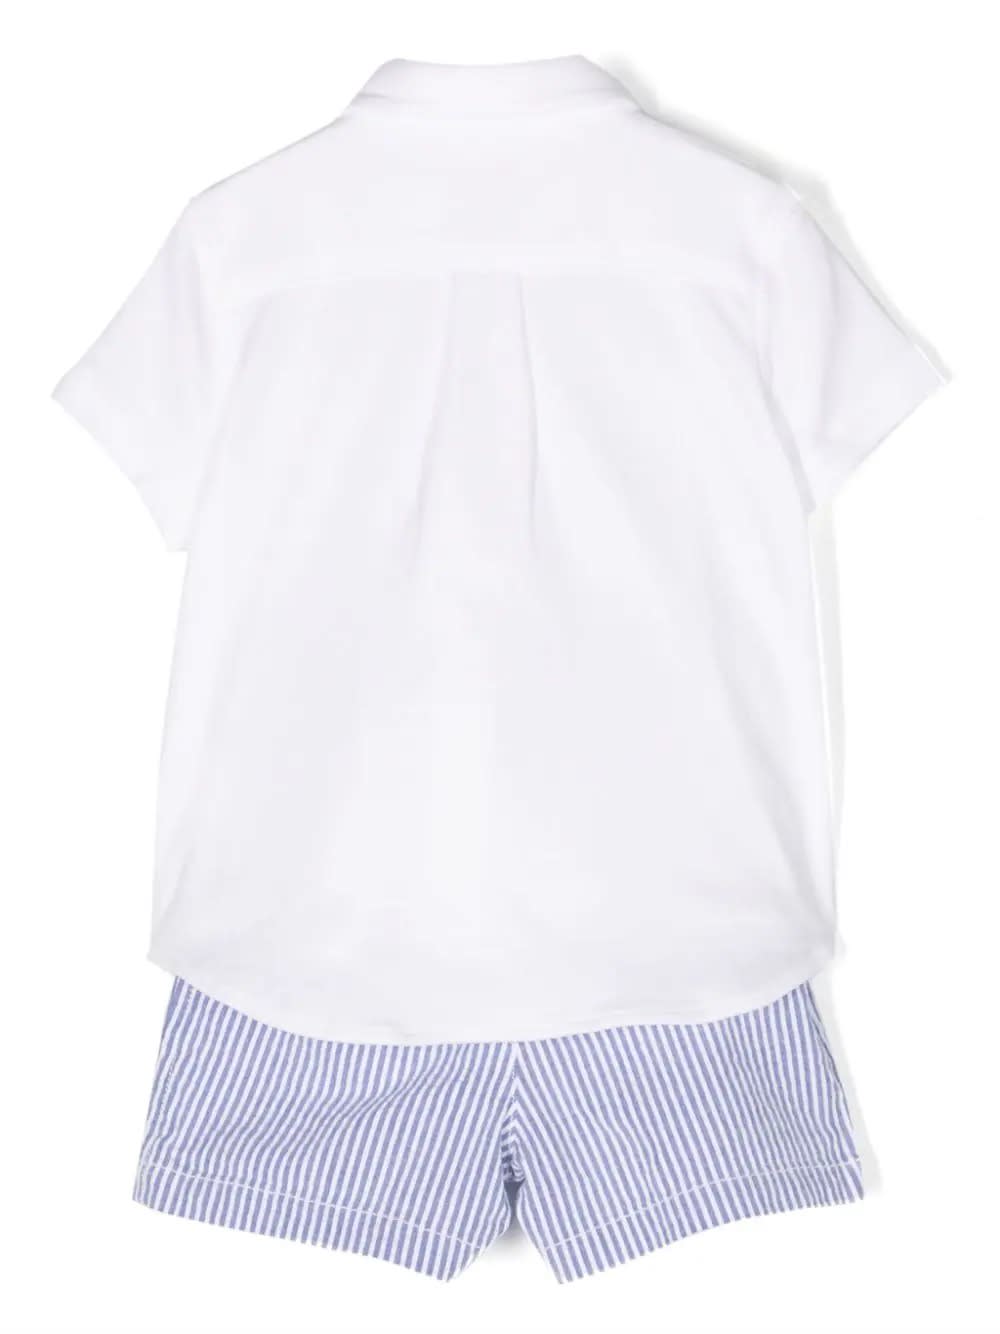 Shop Ralph Lauren White And Light Blue Set With Shirt And Shorts